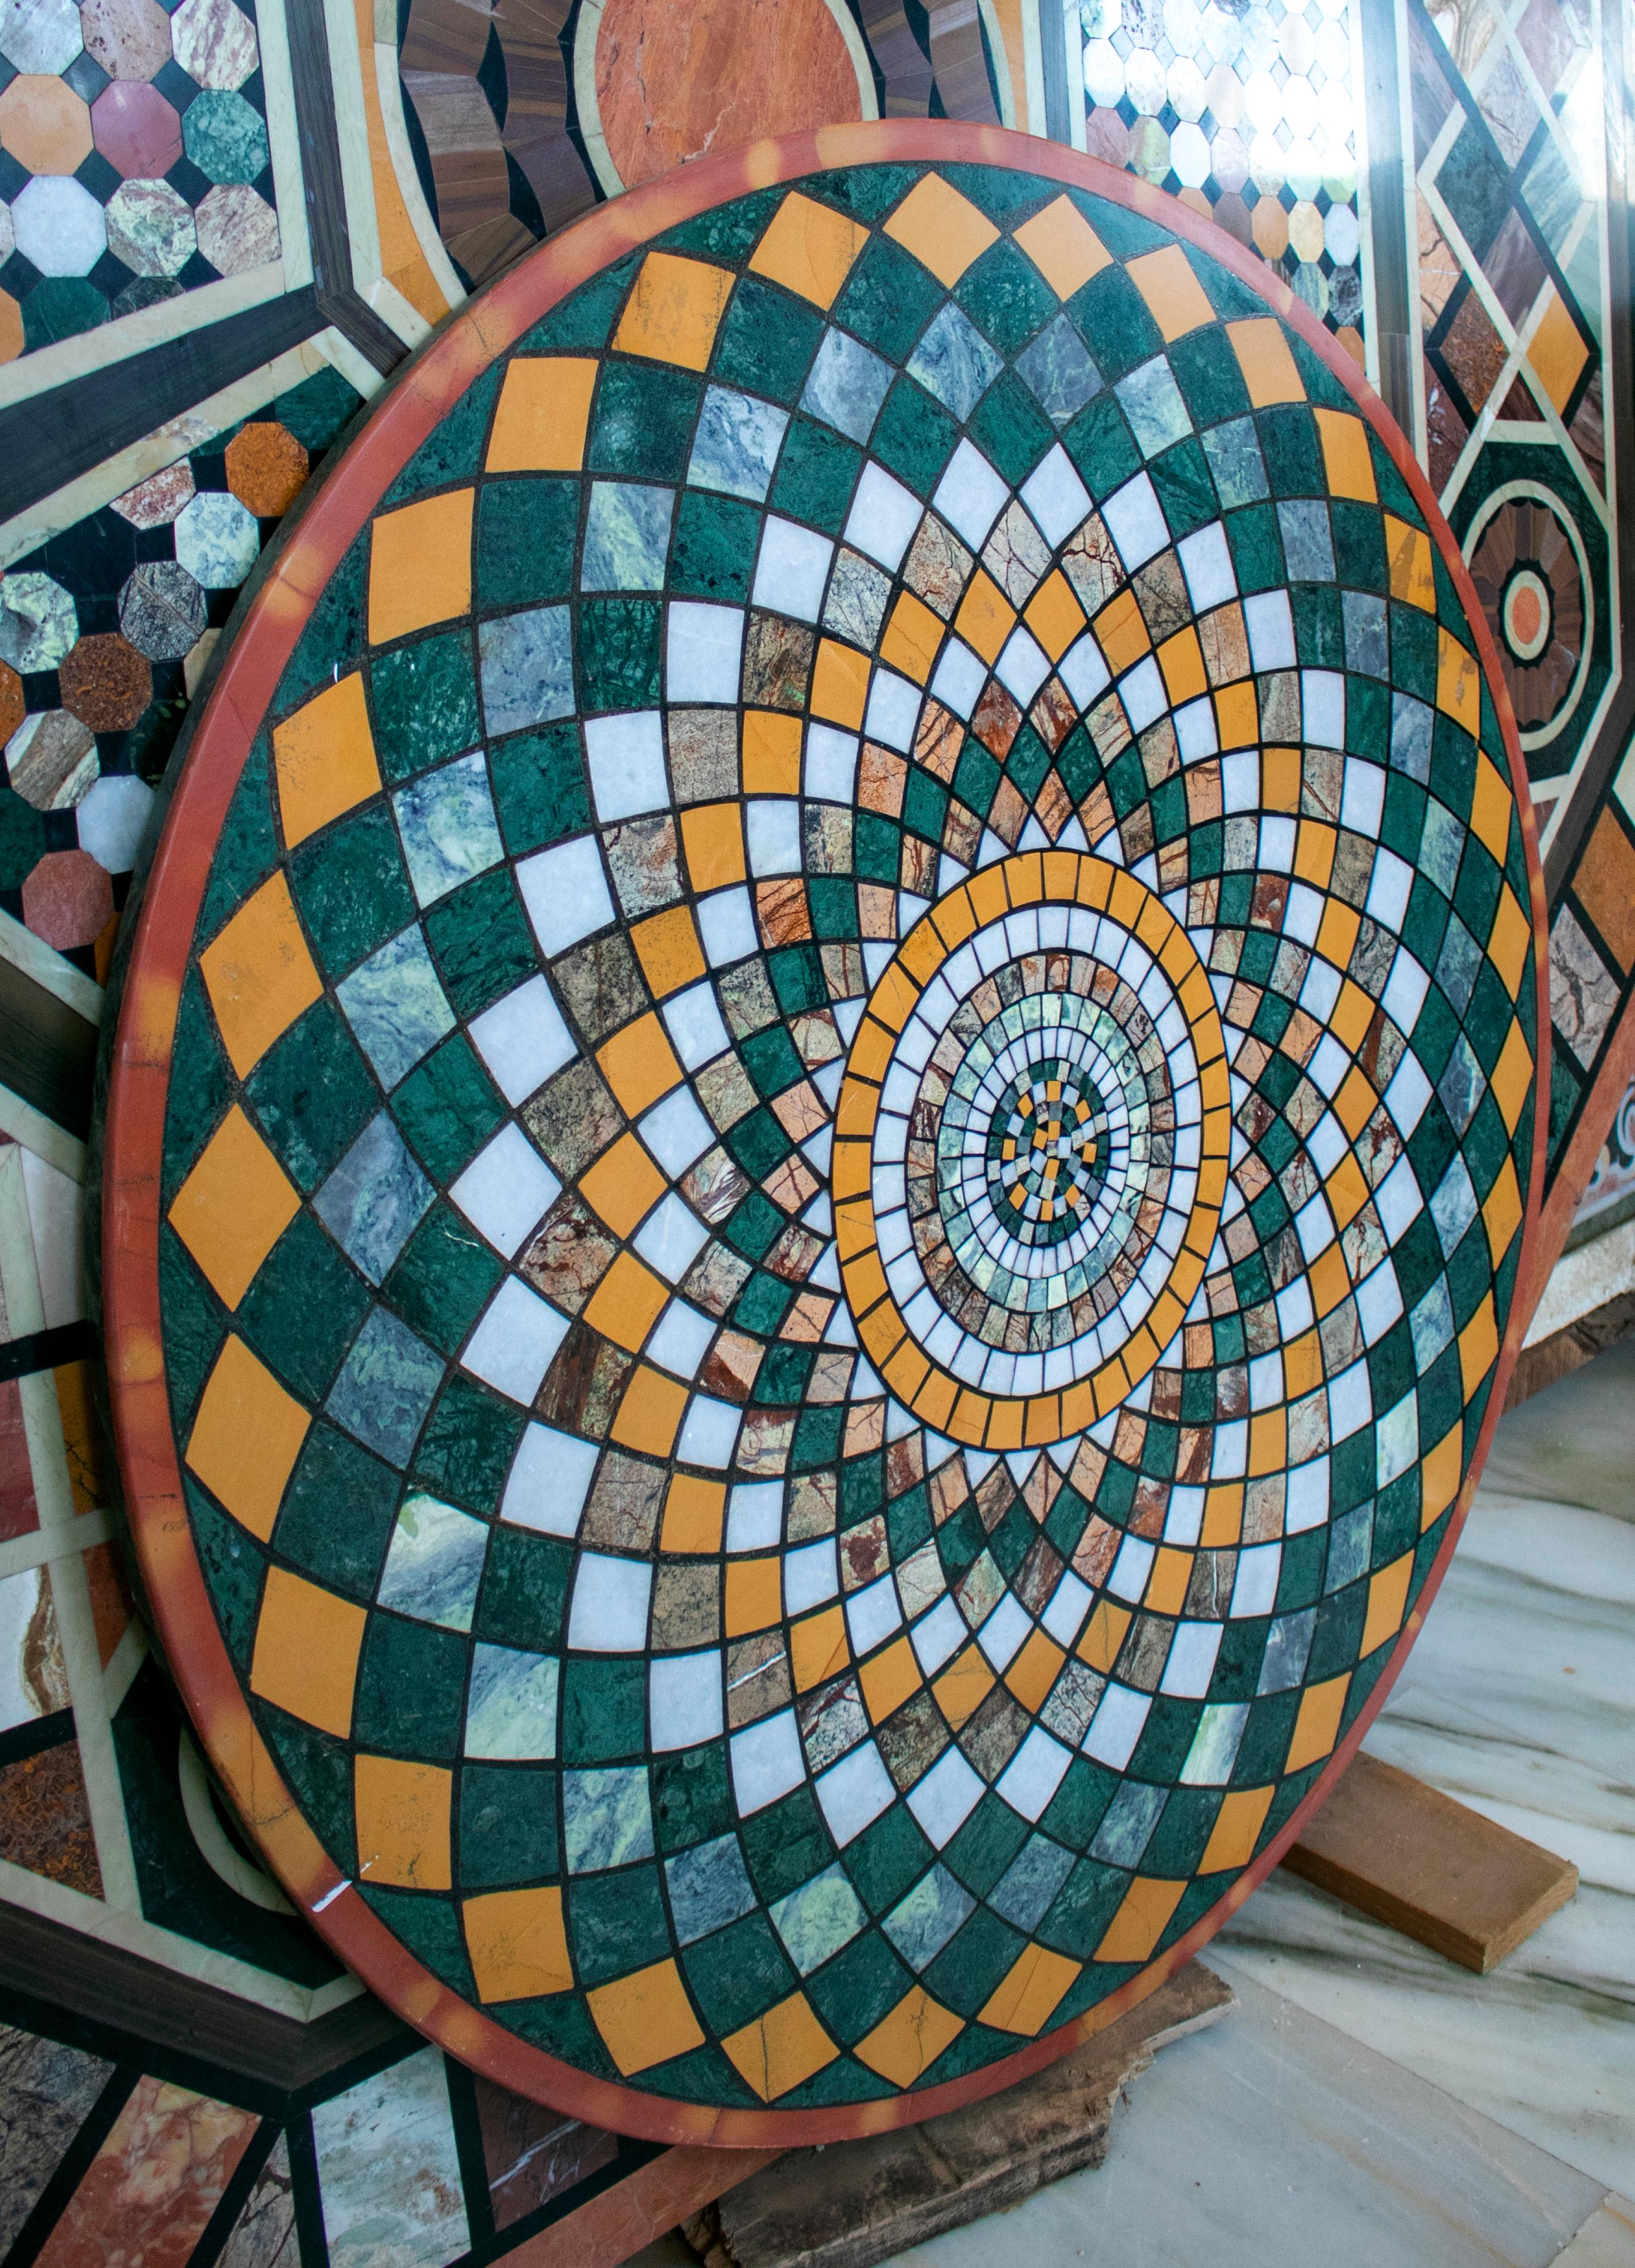 Round Italian geometric pietre dure technique handmade mosaic table top with different marble and semiprecious stones.
  